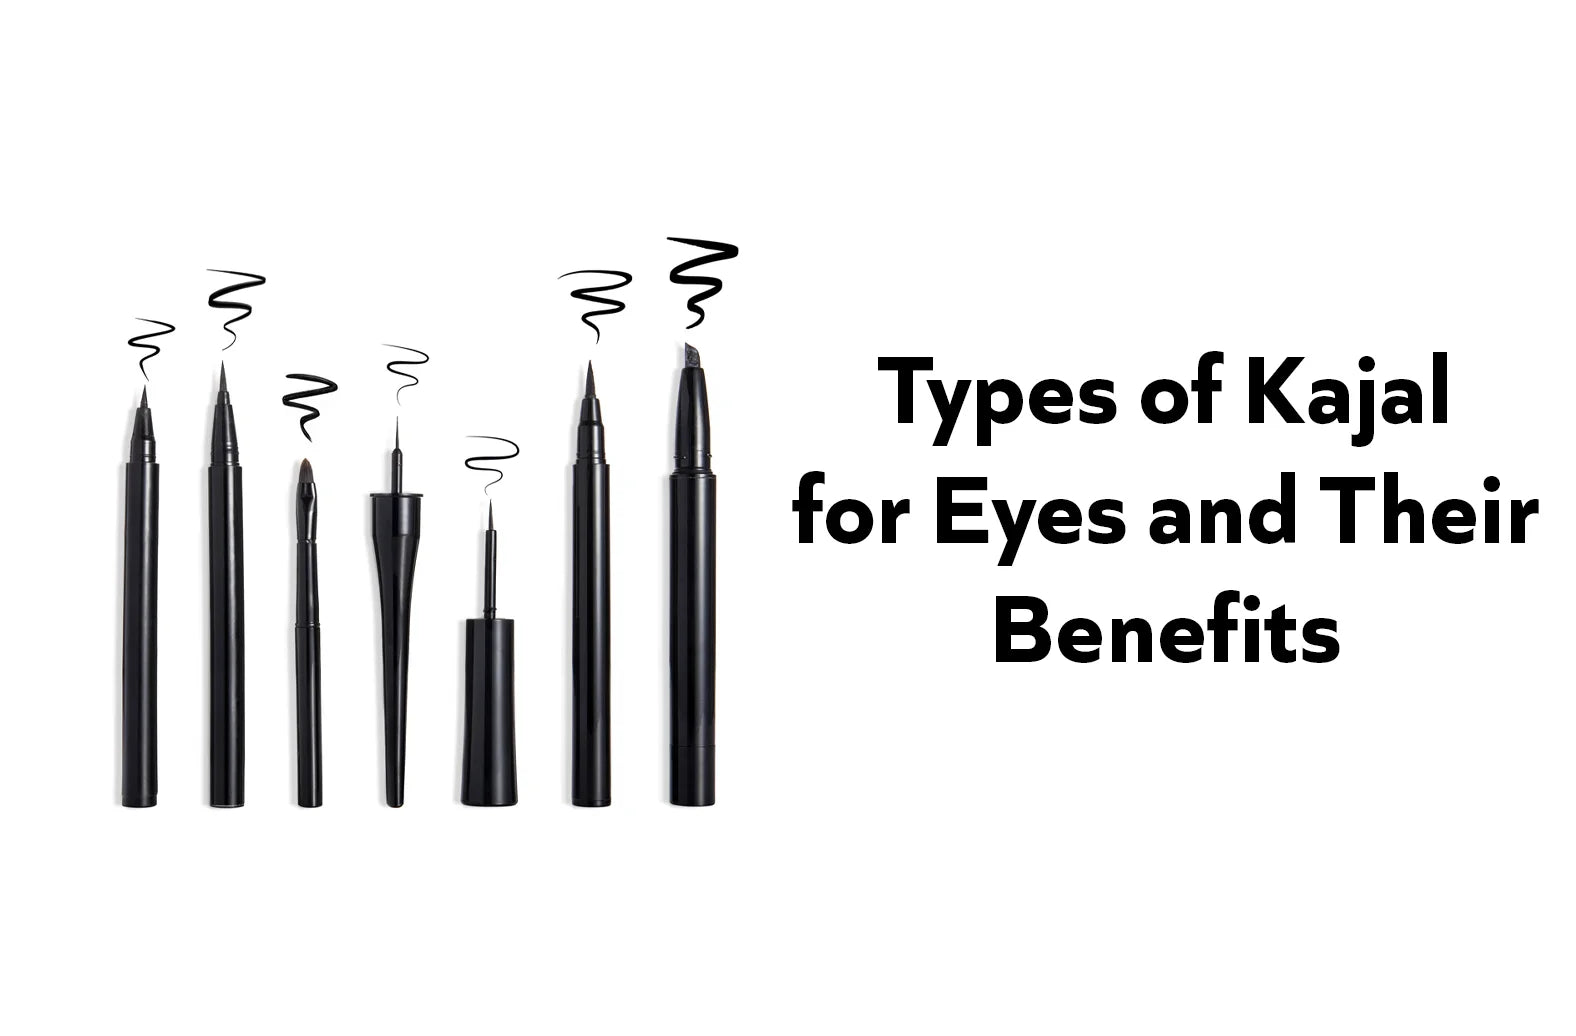 Types of Kajal for Eyes and Their Benefits